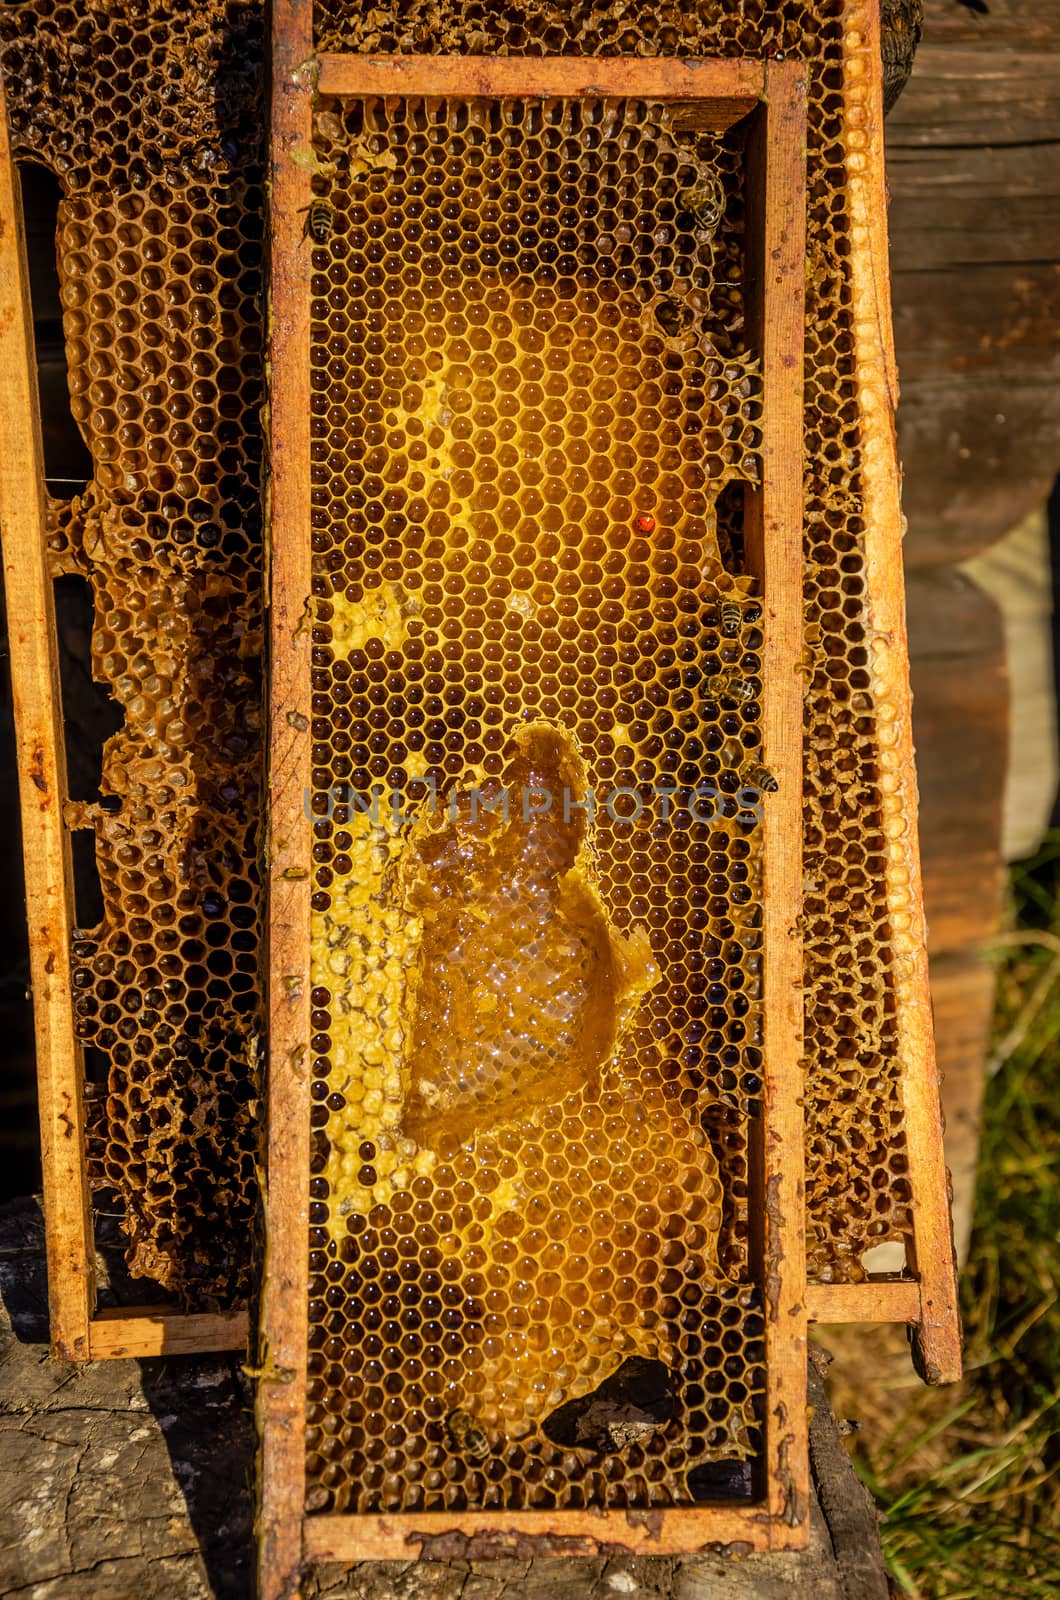 Honeycomb frames filled with honey by Attila